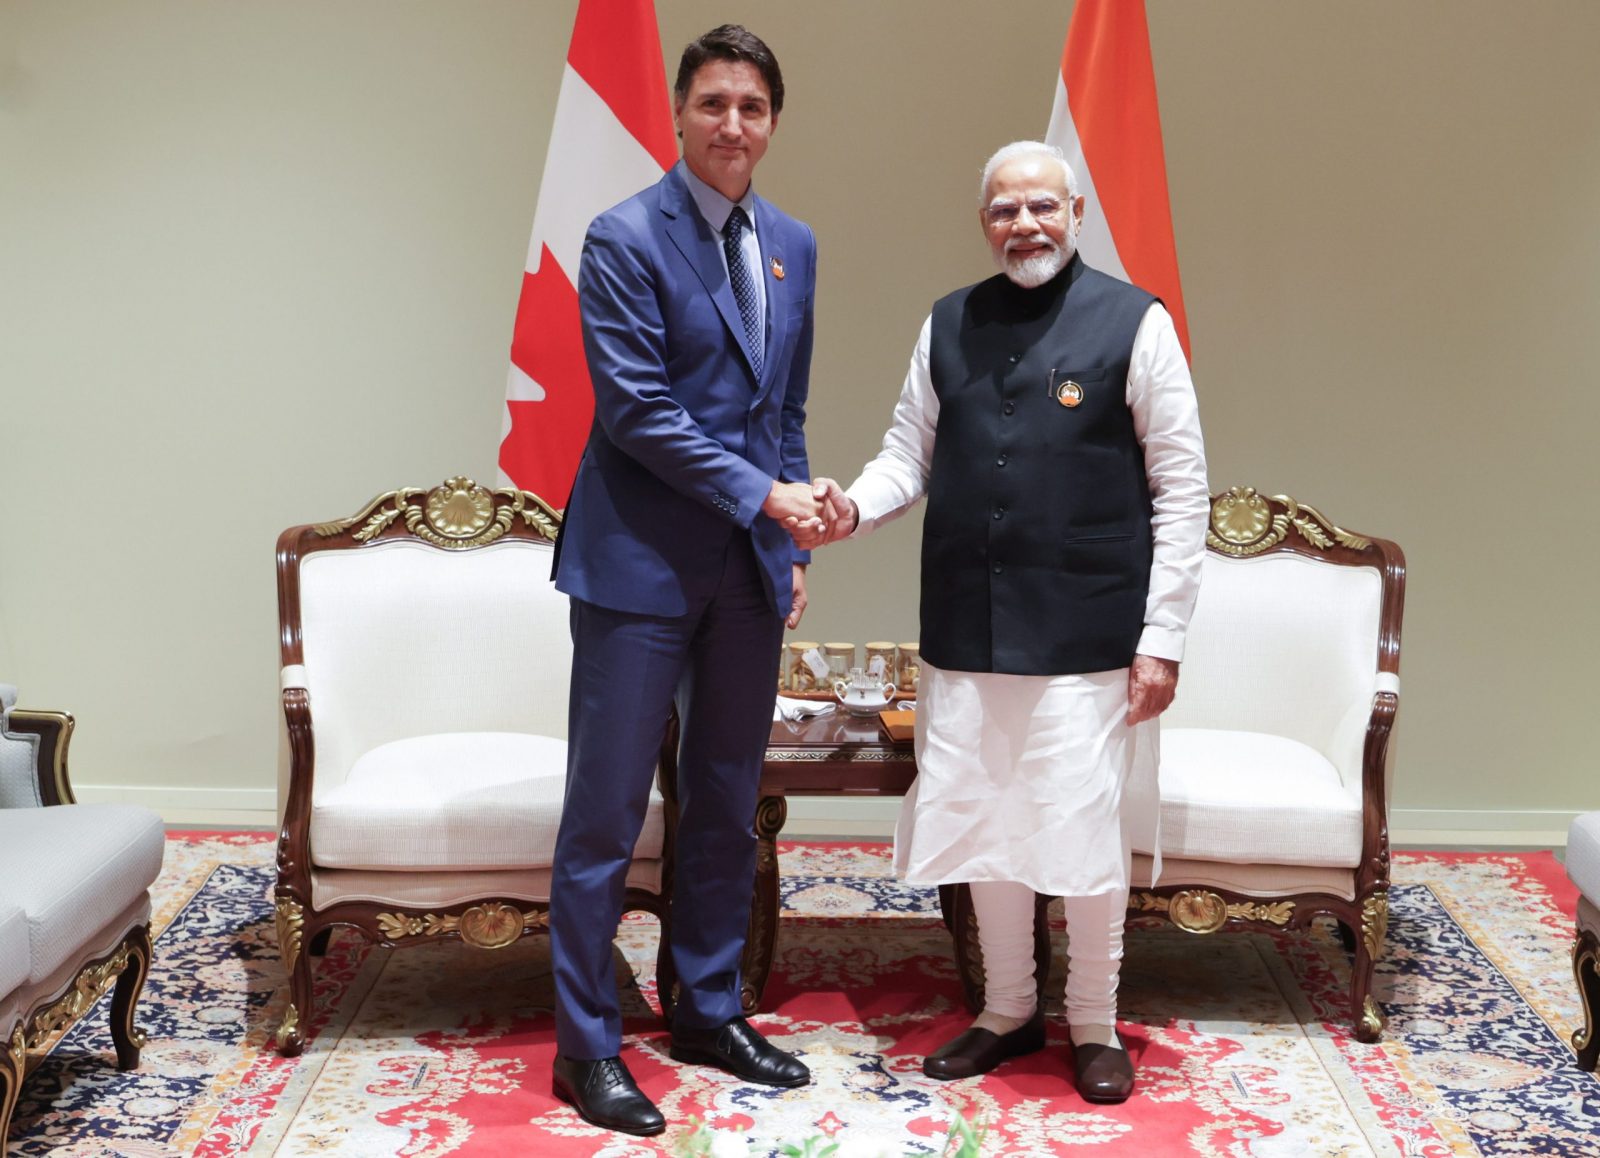 epa10852833 A handout picture made available by The Ministry of External Affairs (MEA) of India, shows Indian Prime Minister Narendra Modi(R), during a bilateral discussions with Prime Minister of Canada, Justin Trudeau (L), in New Delhi, 10 September 2023, on the closing day of the G20 Summit. The G20 Heads of State and Government summit took place in the Indian capital on 09 and 10 September.  EPA/MEA / HANDOUT  HANDOUT EDITORIAL USE ONLY/NO SALES